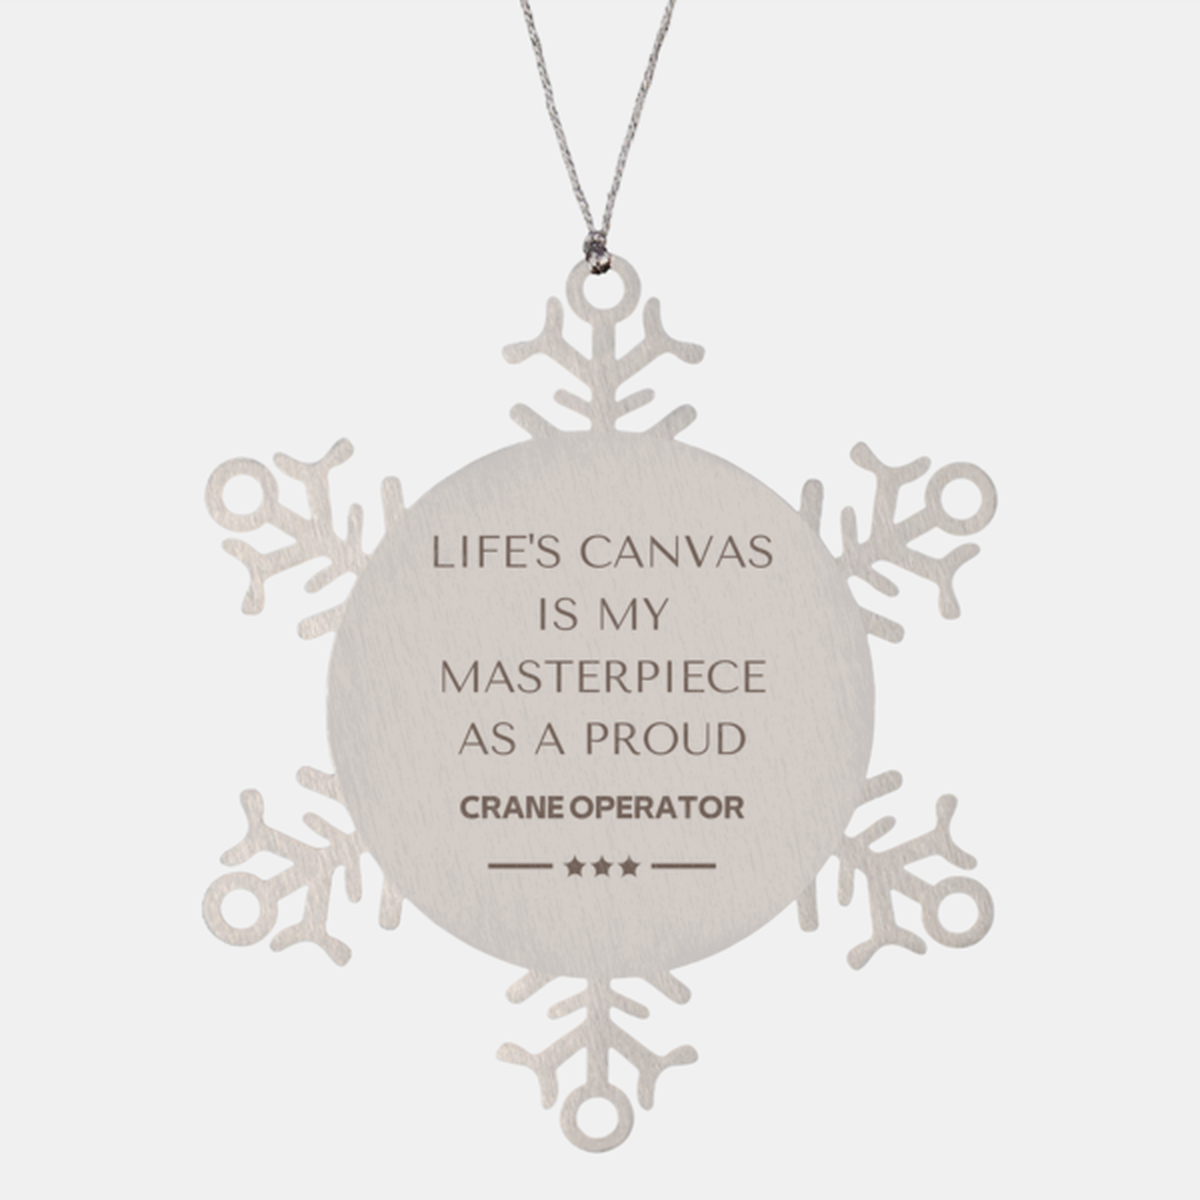 Proud Crane Operator Gifts, Life's canvas is my masterpiece, Epic Birthday Christmas Unique Snowflake Ornament For Crane Operator, Coworkers, Men, Women, Friends